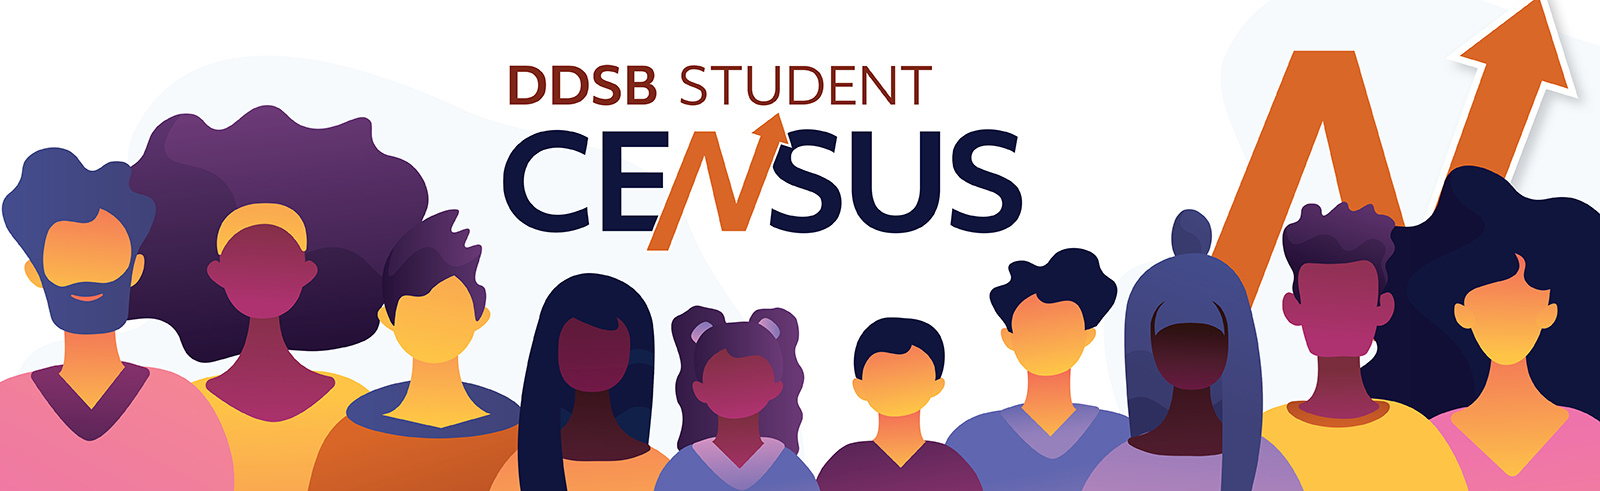 Student Census logo with student faceless icons displaying as a group